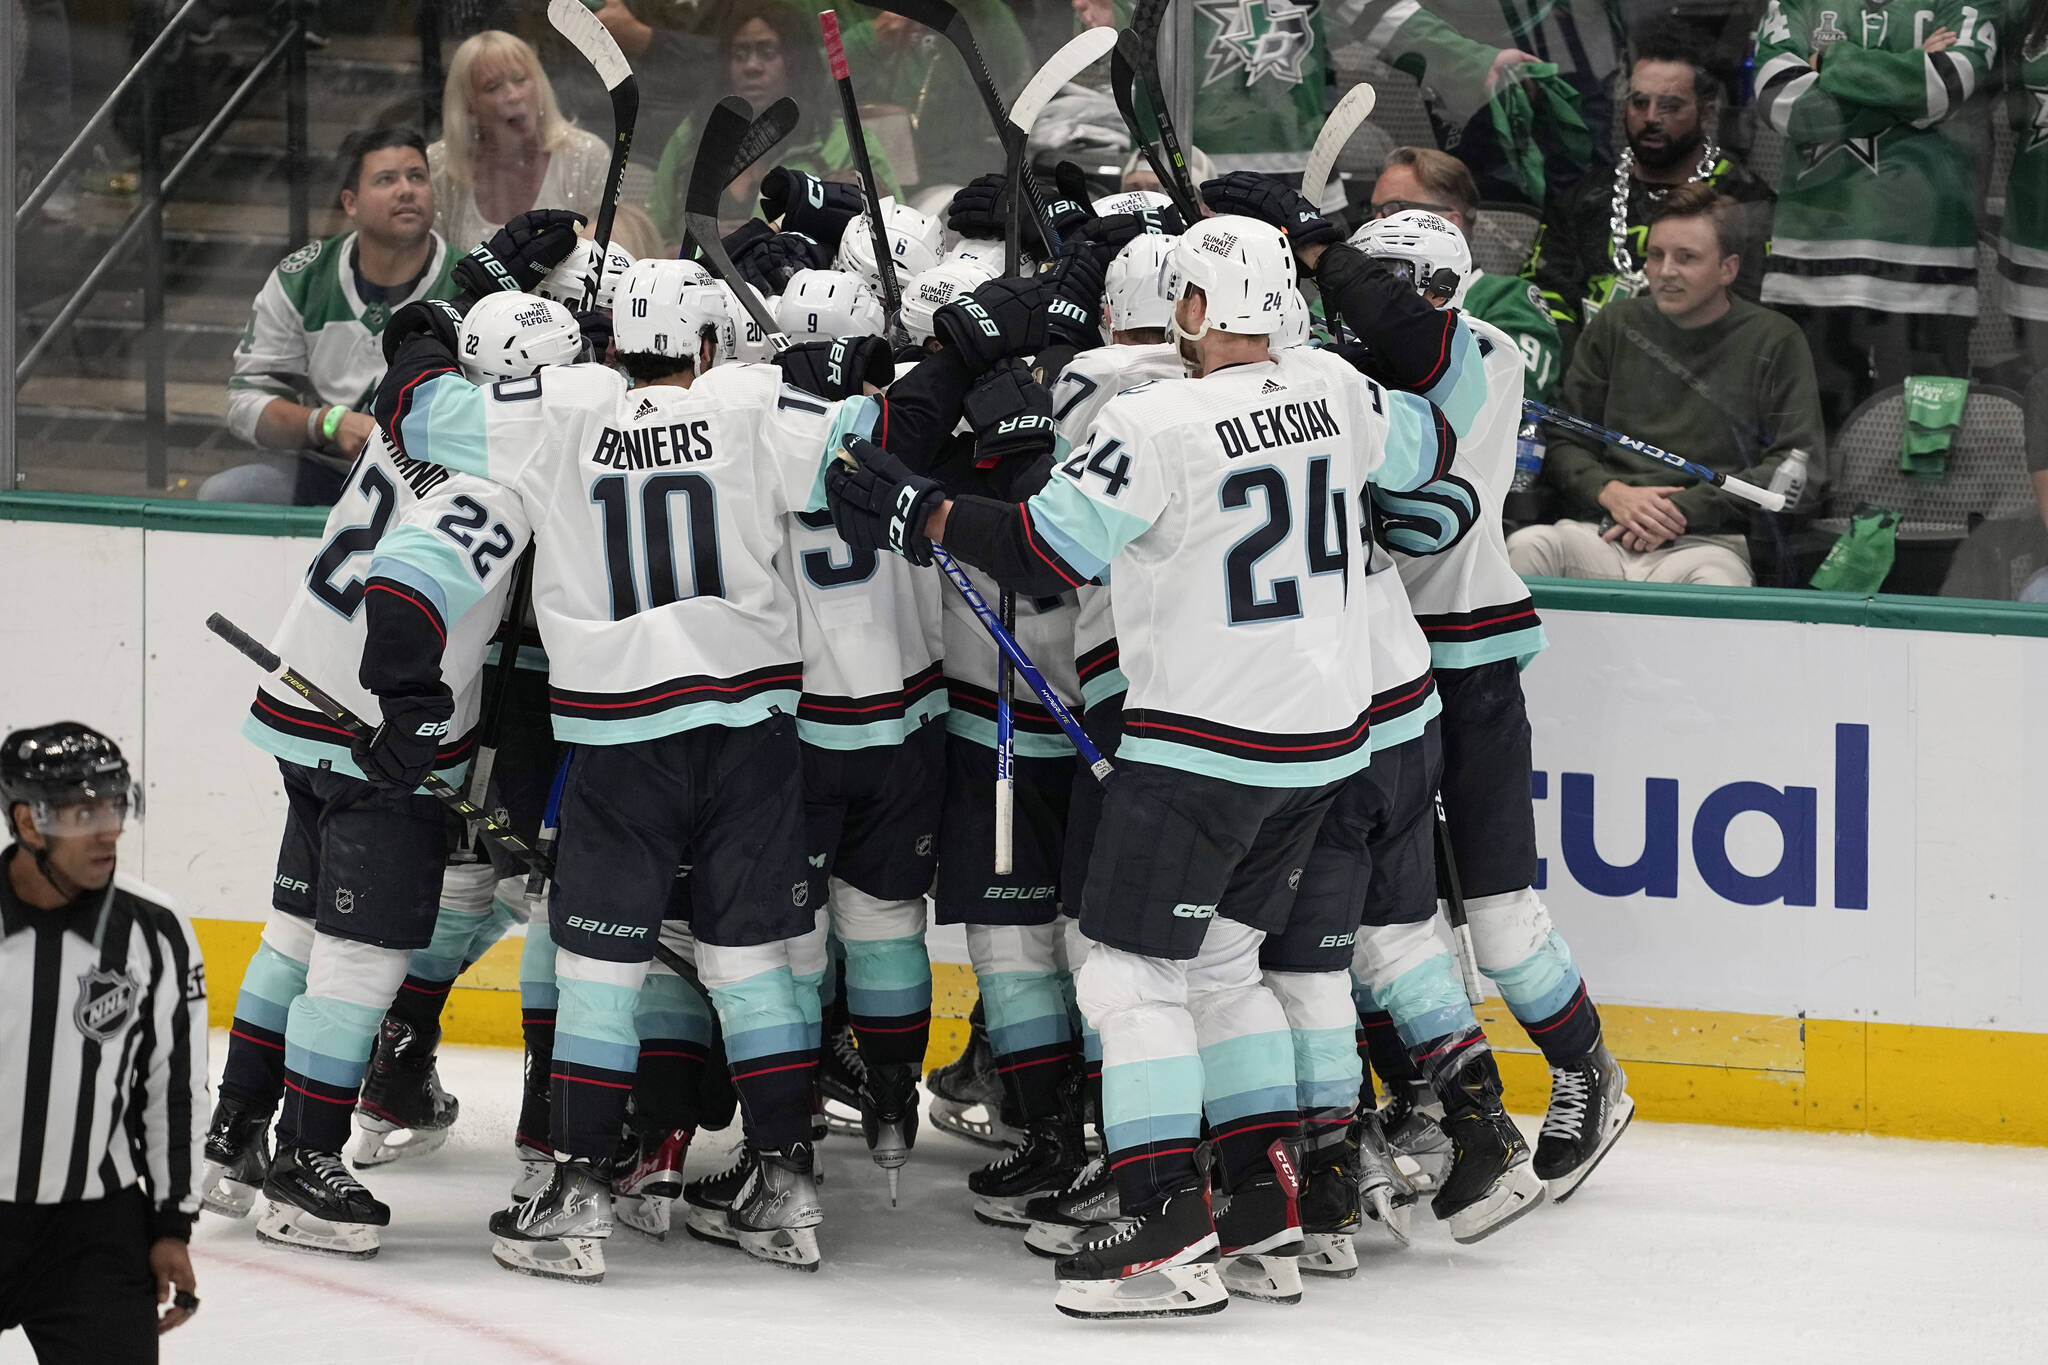 Kraken players celebrate after Yanni Gourde scored in overtime of Game 1 of a second-round playoff series against the Stars on Tuesday in Dallas. The Kraken won 5-4. (AP Photo/Tony Gutierrez)